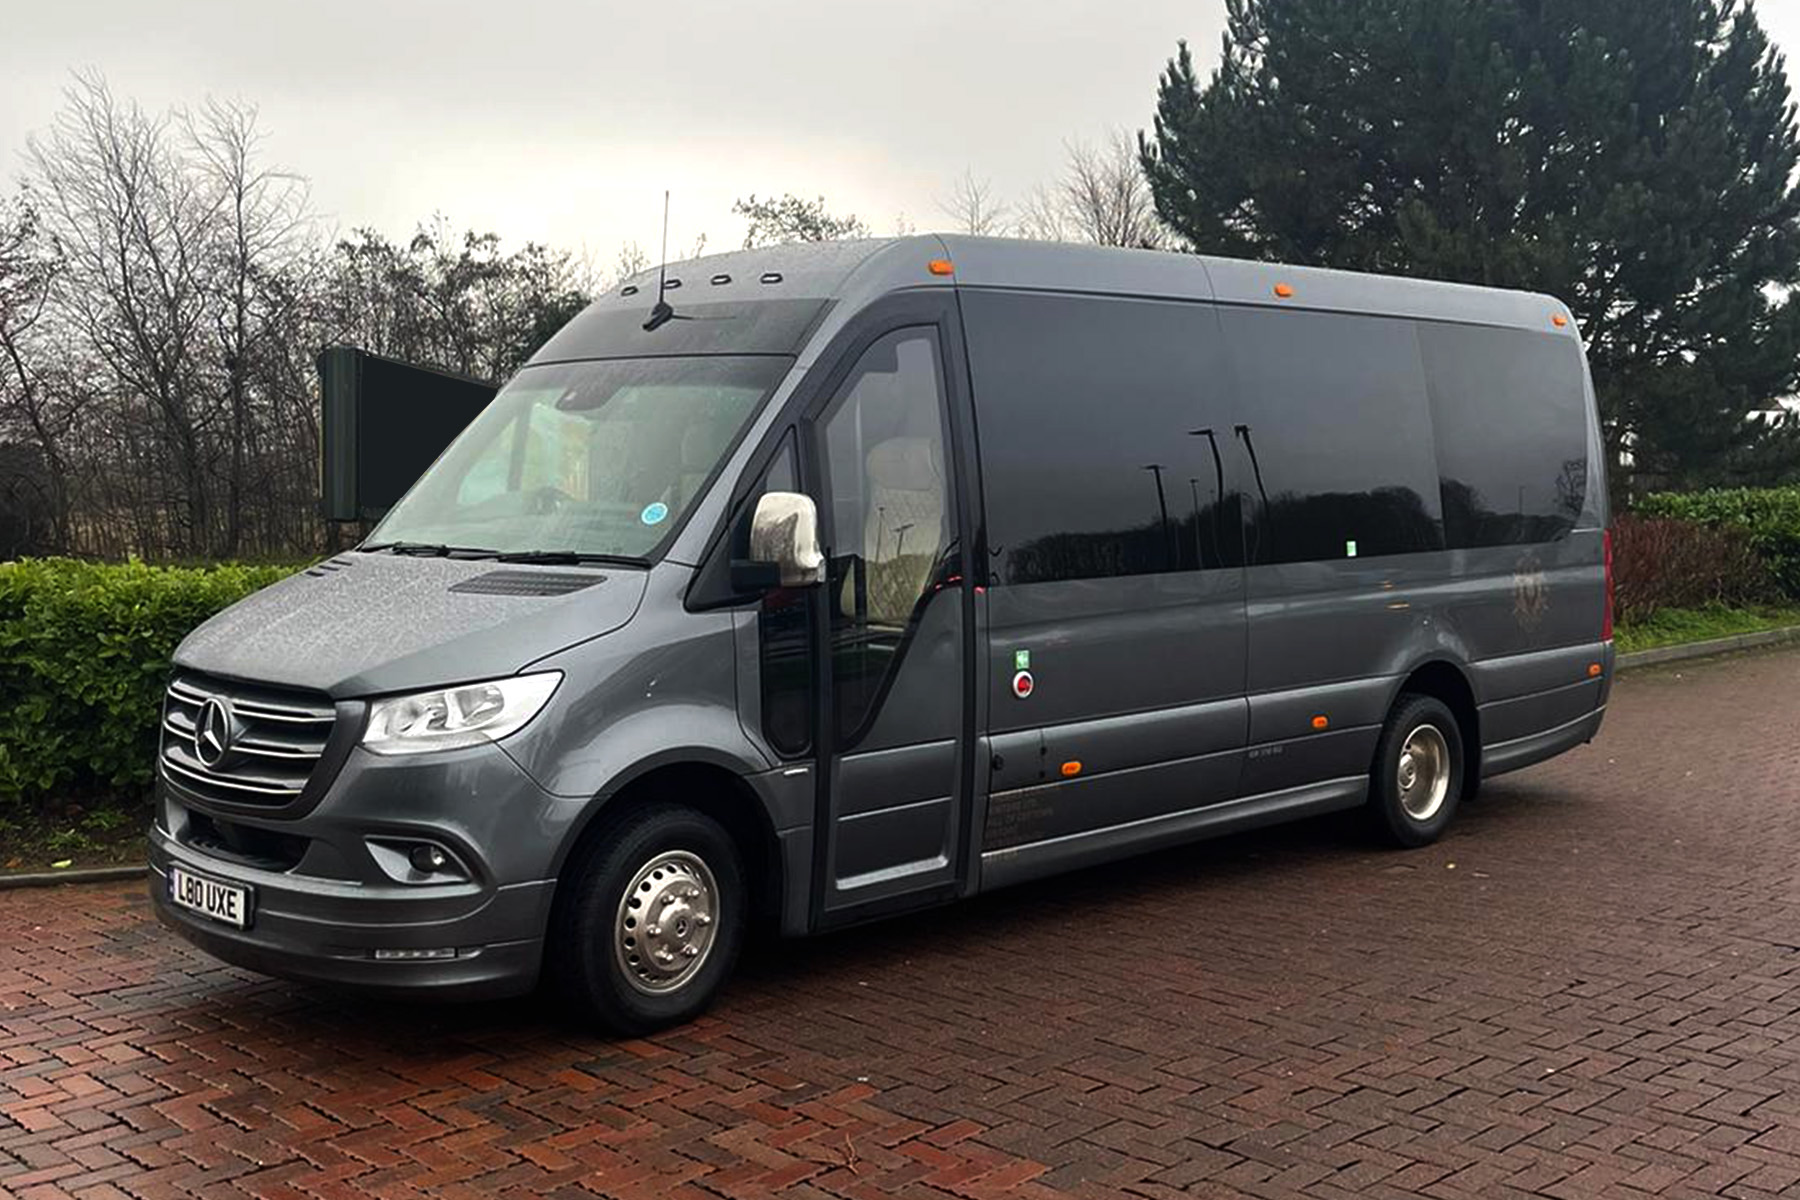 Discovering the UK: Top Tips for Planning Your Minibus Route